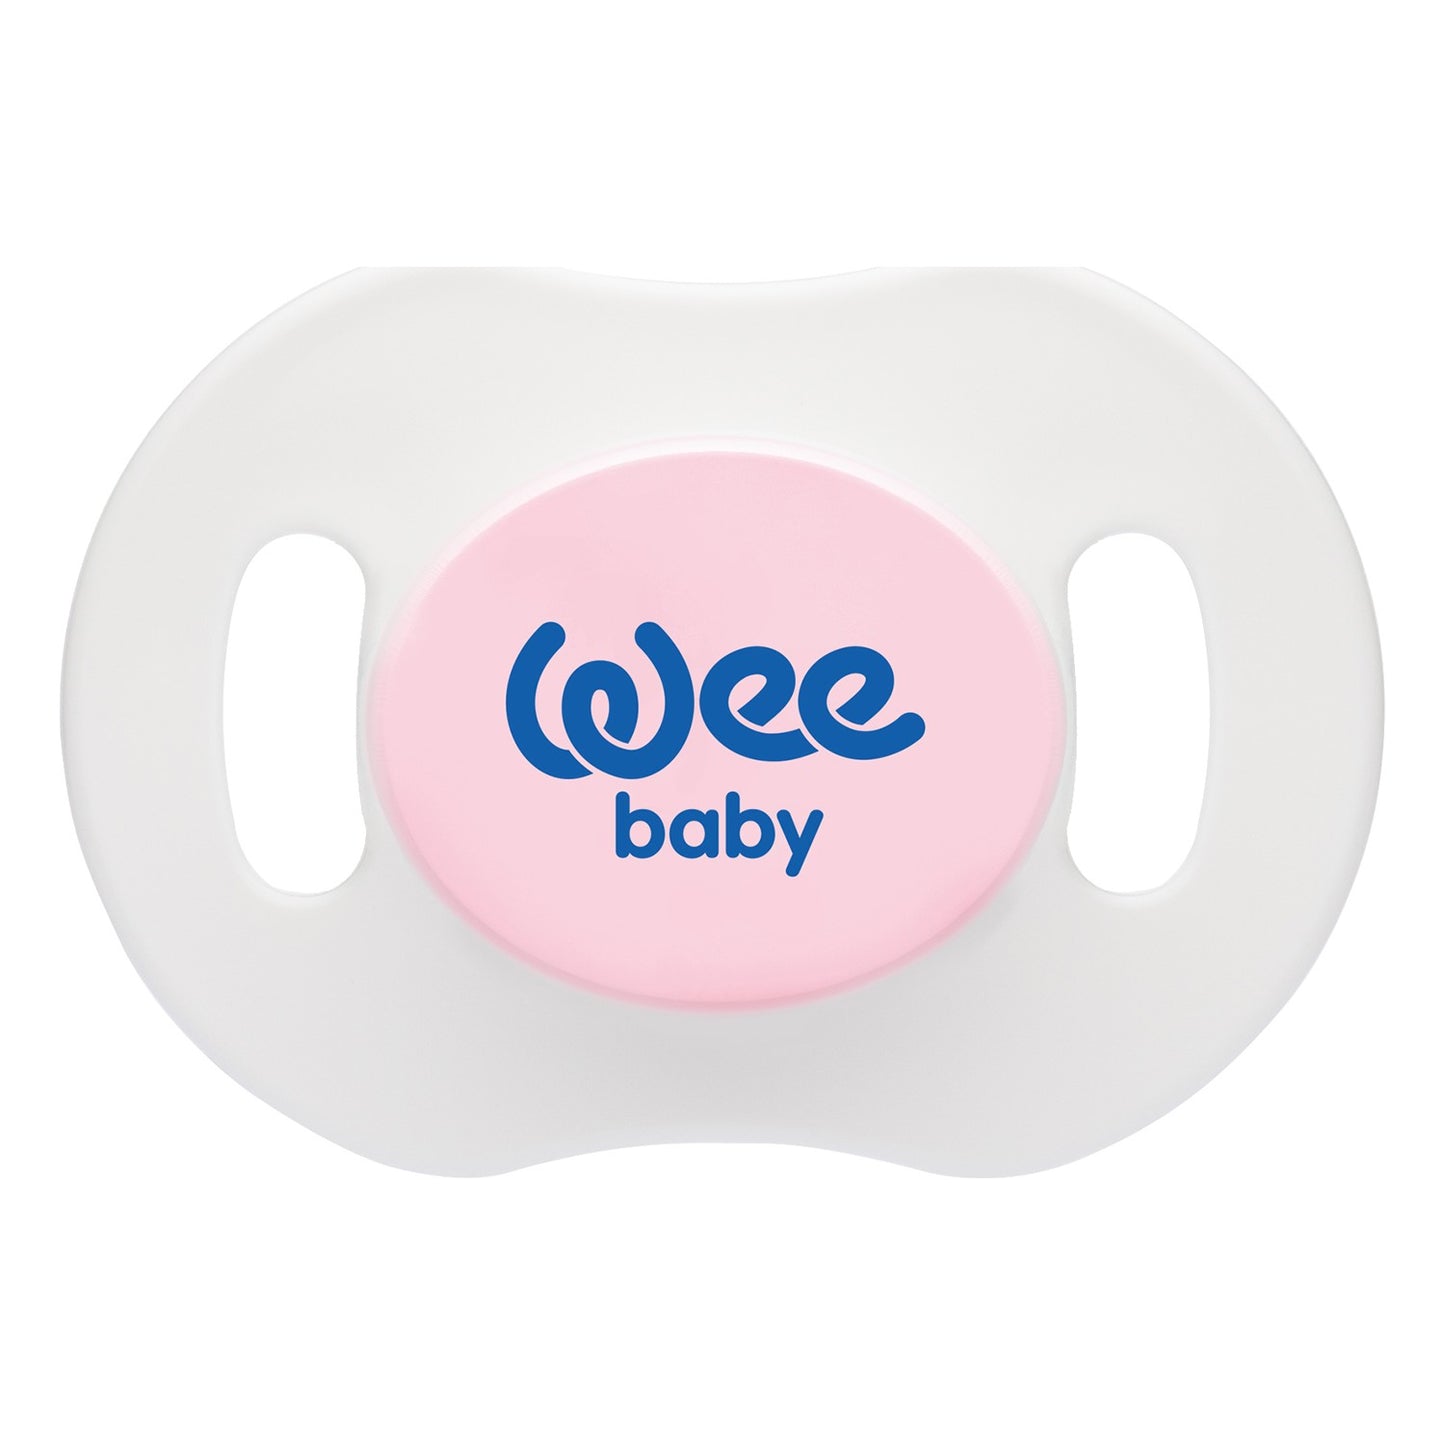 weebaby Orthodontic Night Soother (Gowing in the dark )No.2 pink